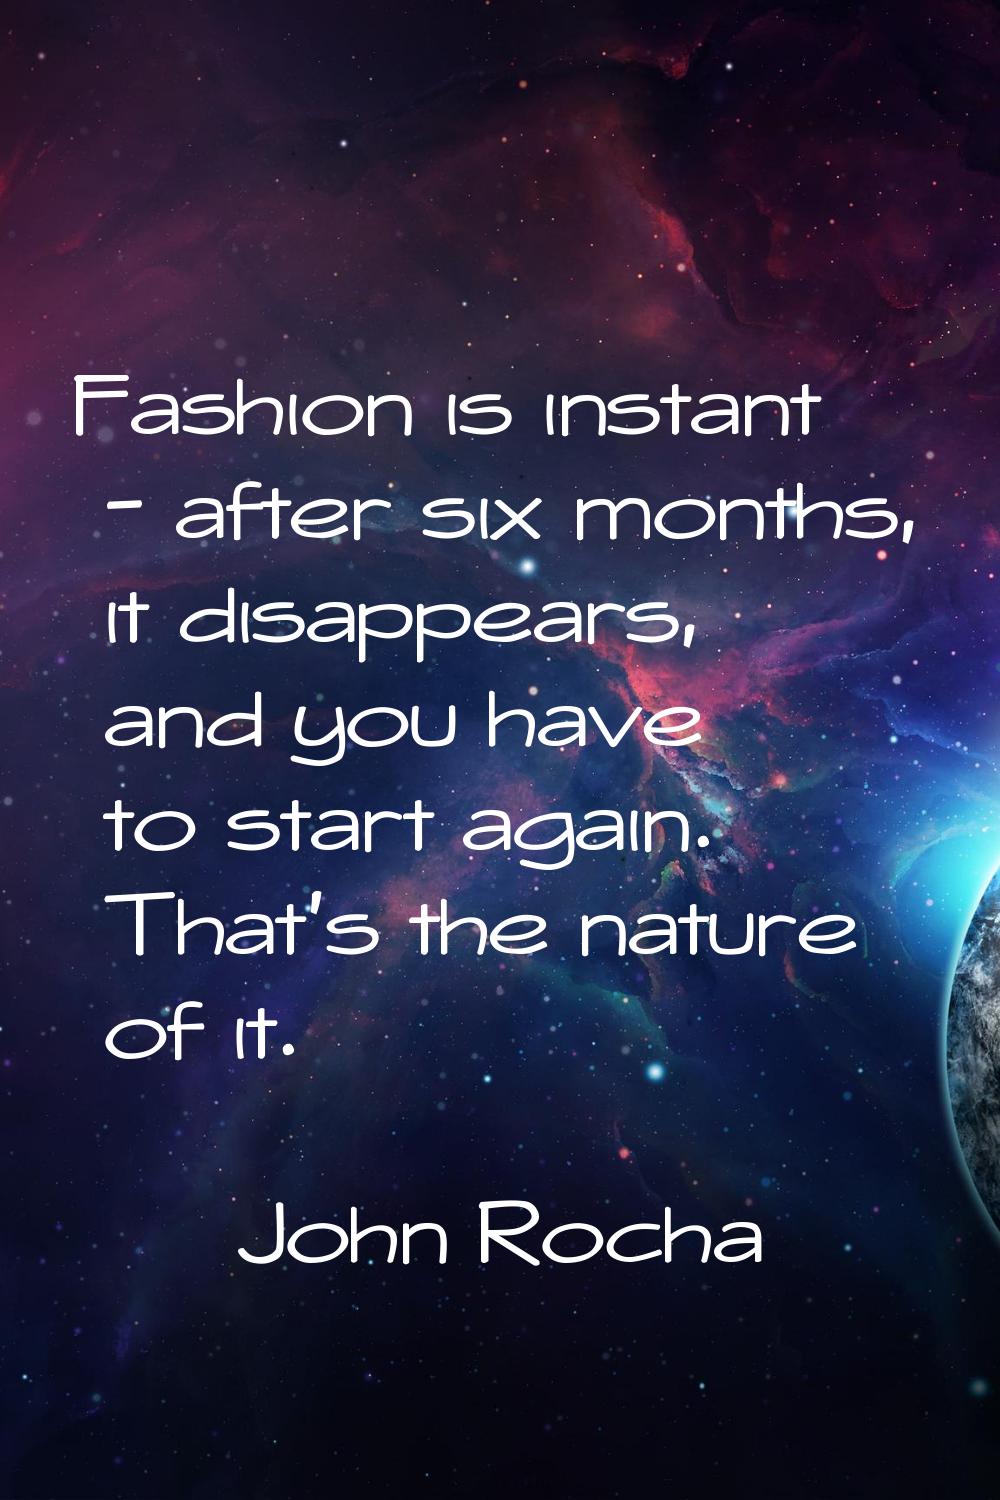 Fashion is instant - after six months, it disappears, and you have to start again. That's the natur